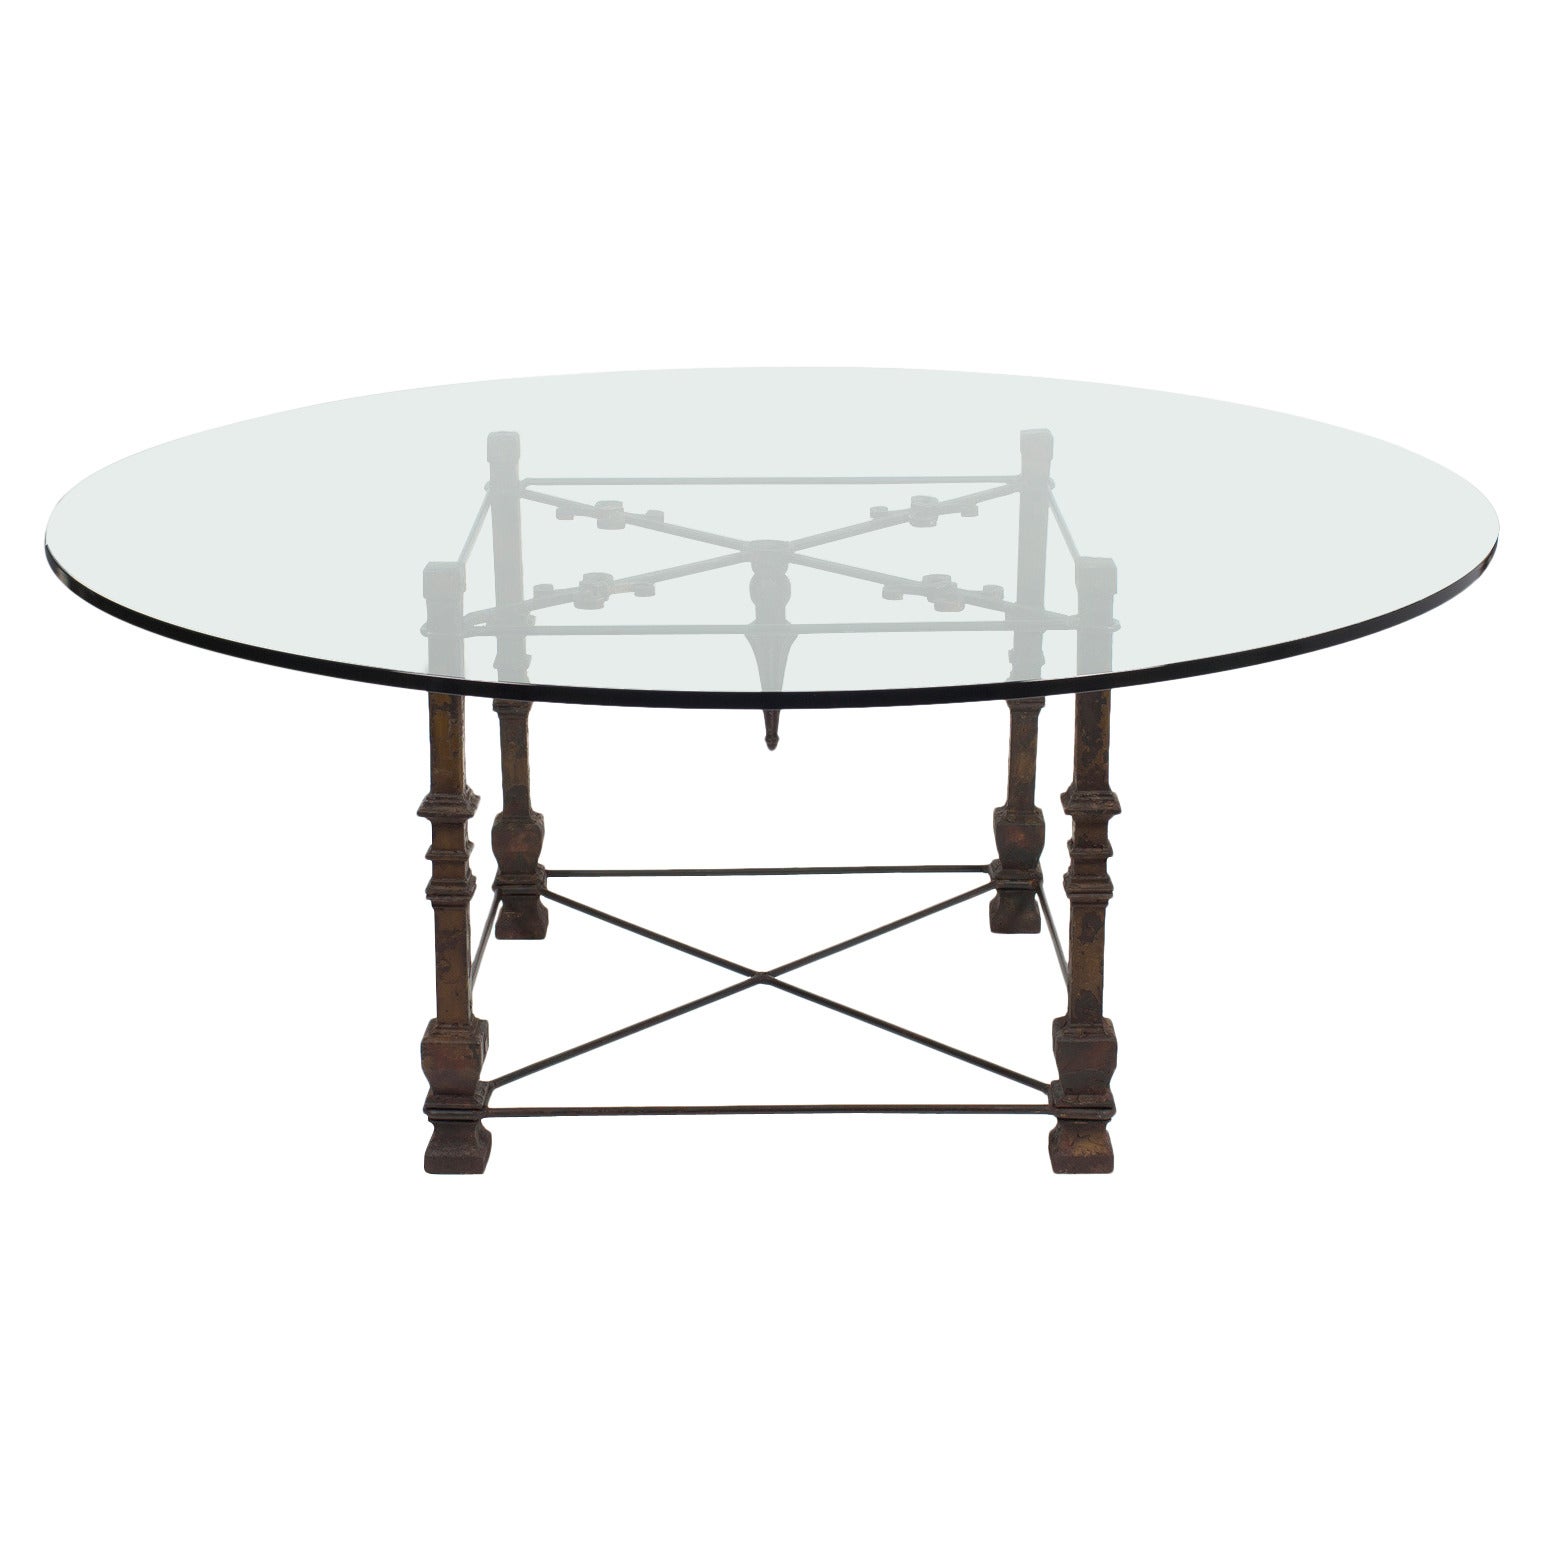 Antique Forged Iron Dining Table with Glass Top